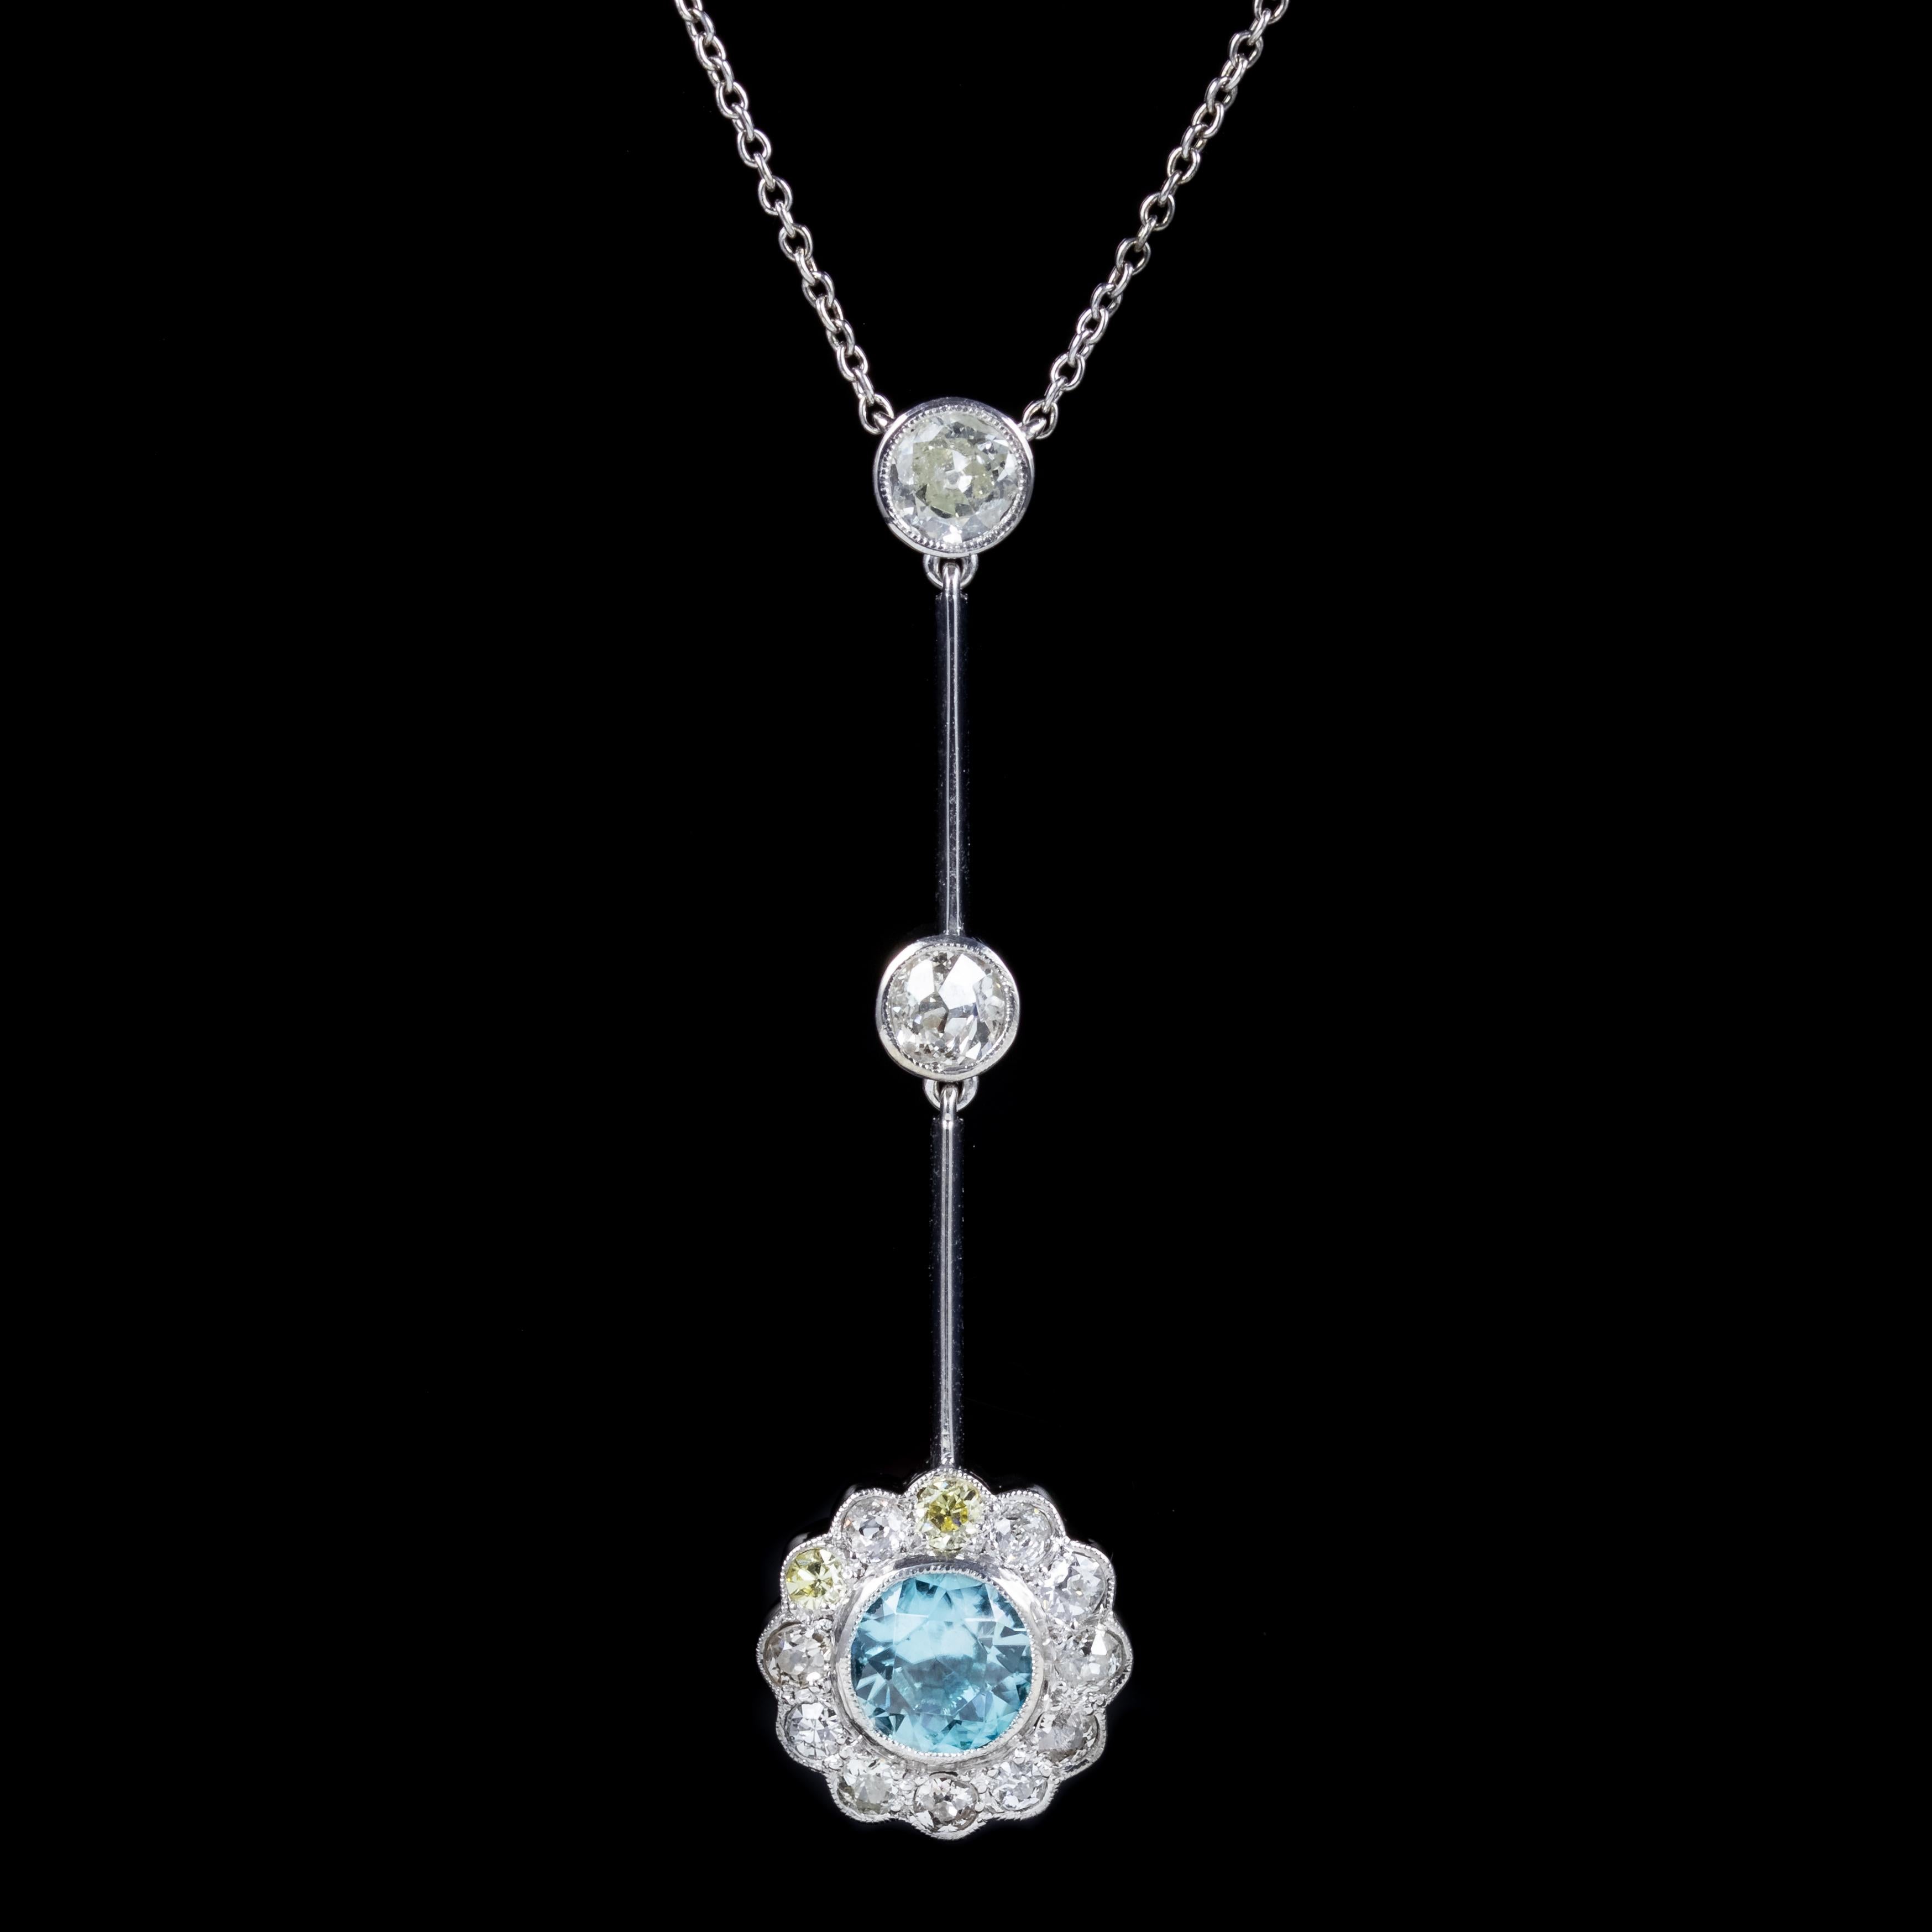 A stunning antique Edwardian lavaliere necklace showcasing a beautiful double drop pendant set with two old cut Diamonds leading to a flower shaped gallery at the bottom adorned with a 1.20ct blue Zircon haloed by more Diamonds.

The largest